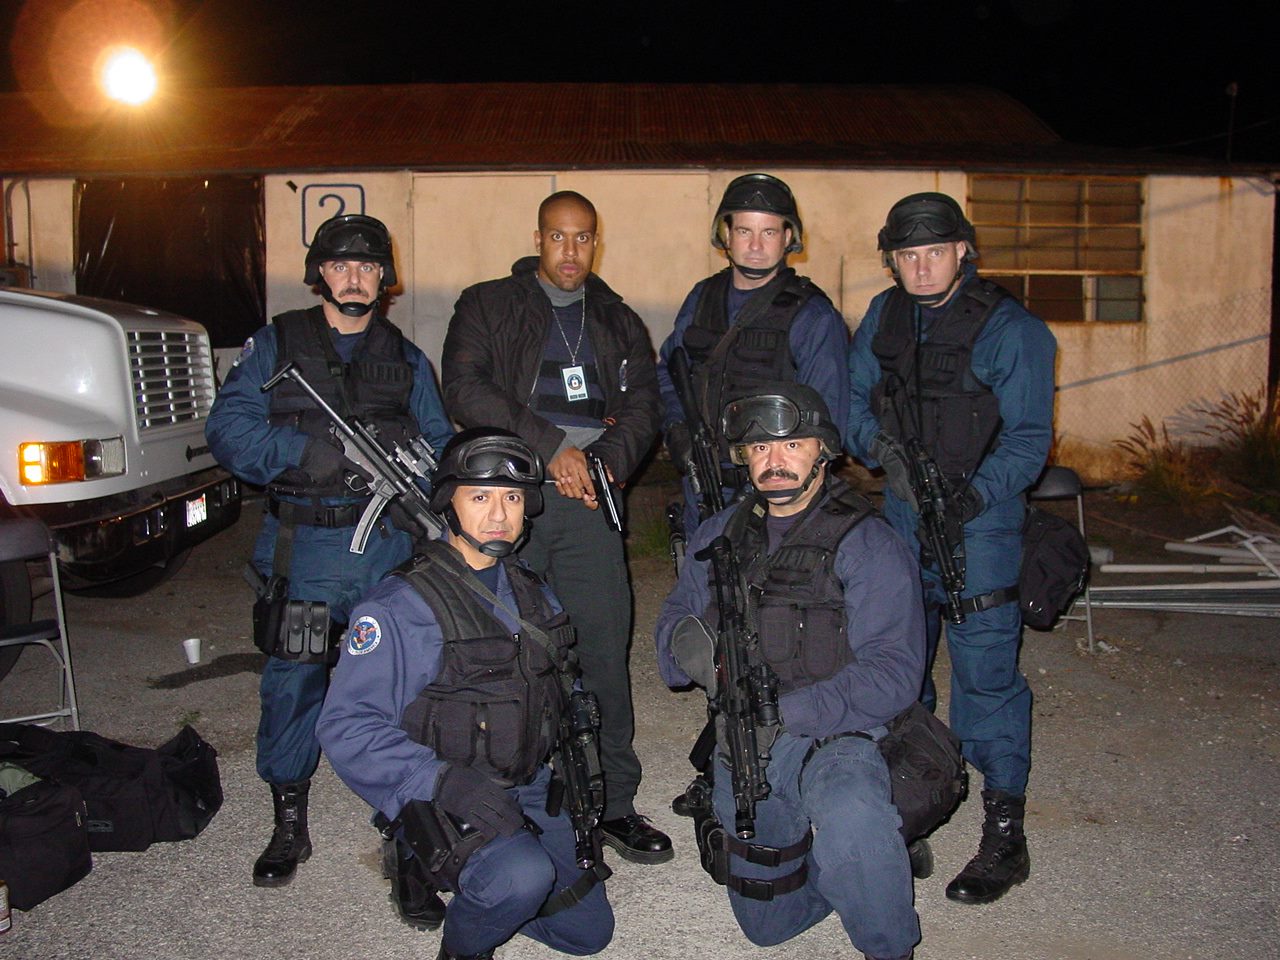 SWAT4HIRE on location filming 24 with Kiefer Sutherland. Pictured with another of 24 great actors! Tactical Casting provided by Patricia Homan Davila of SWAT4HIRE; originally subcontracted by Central Casting.